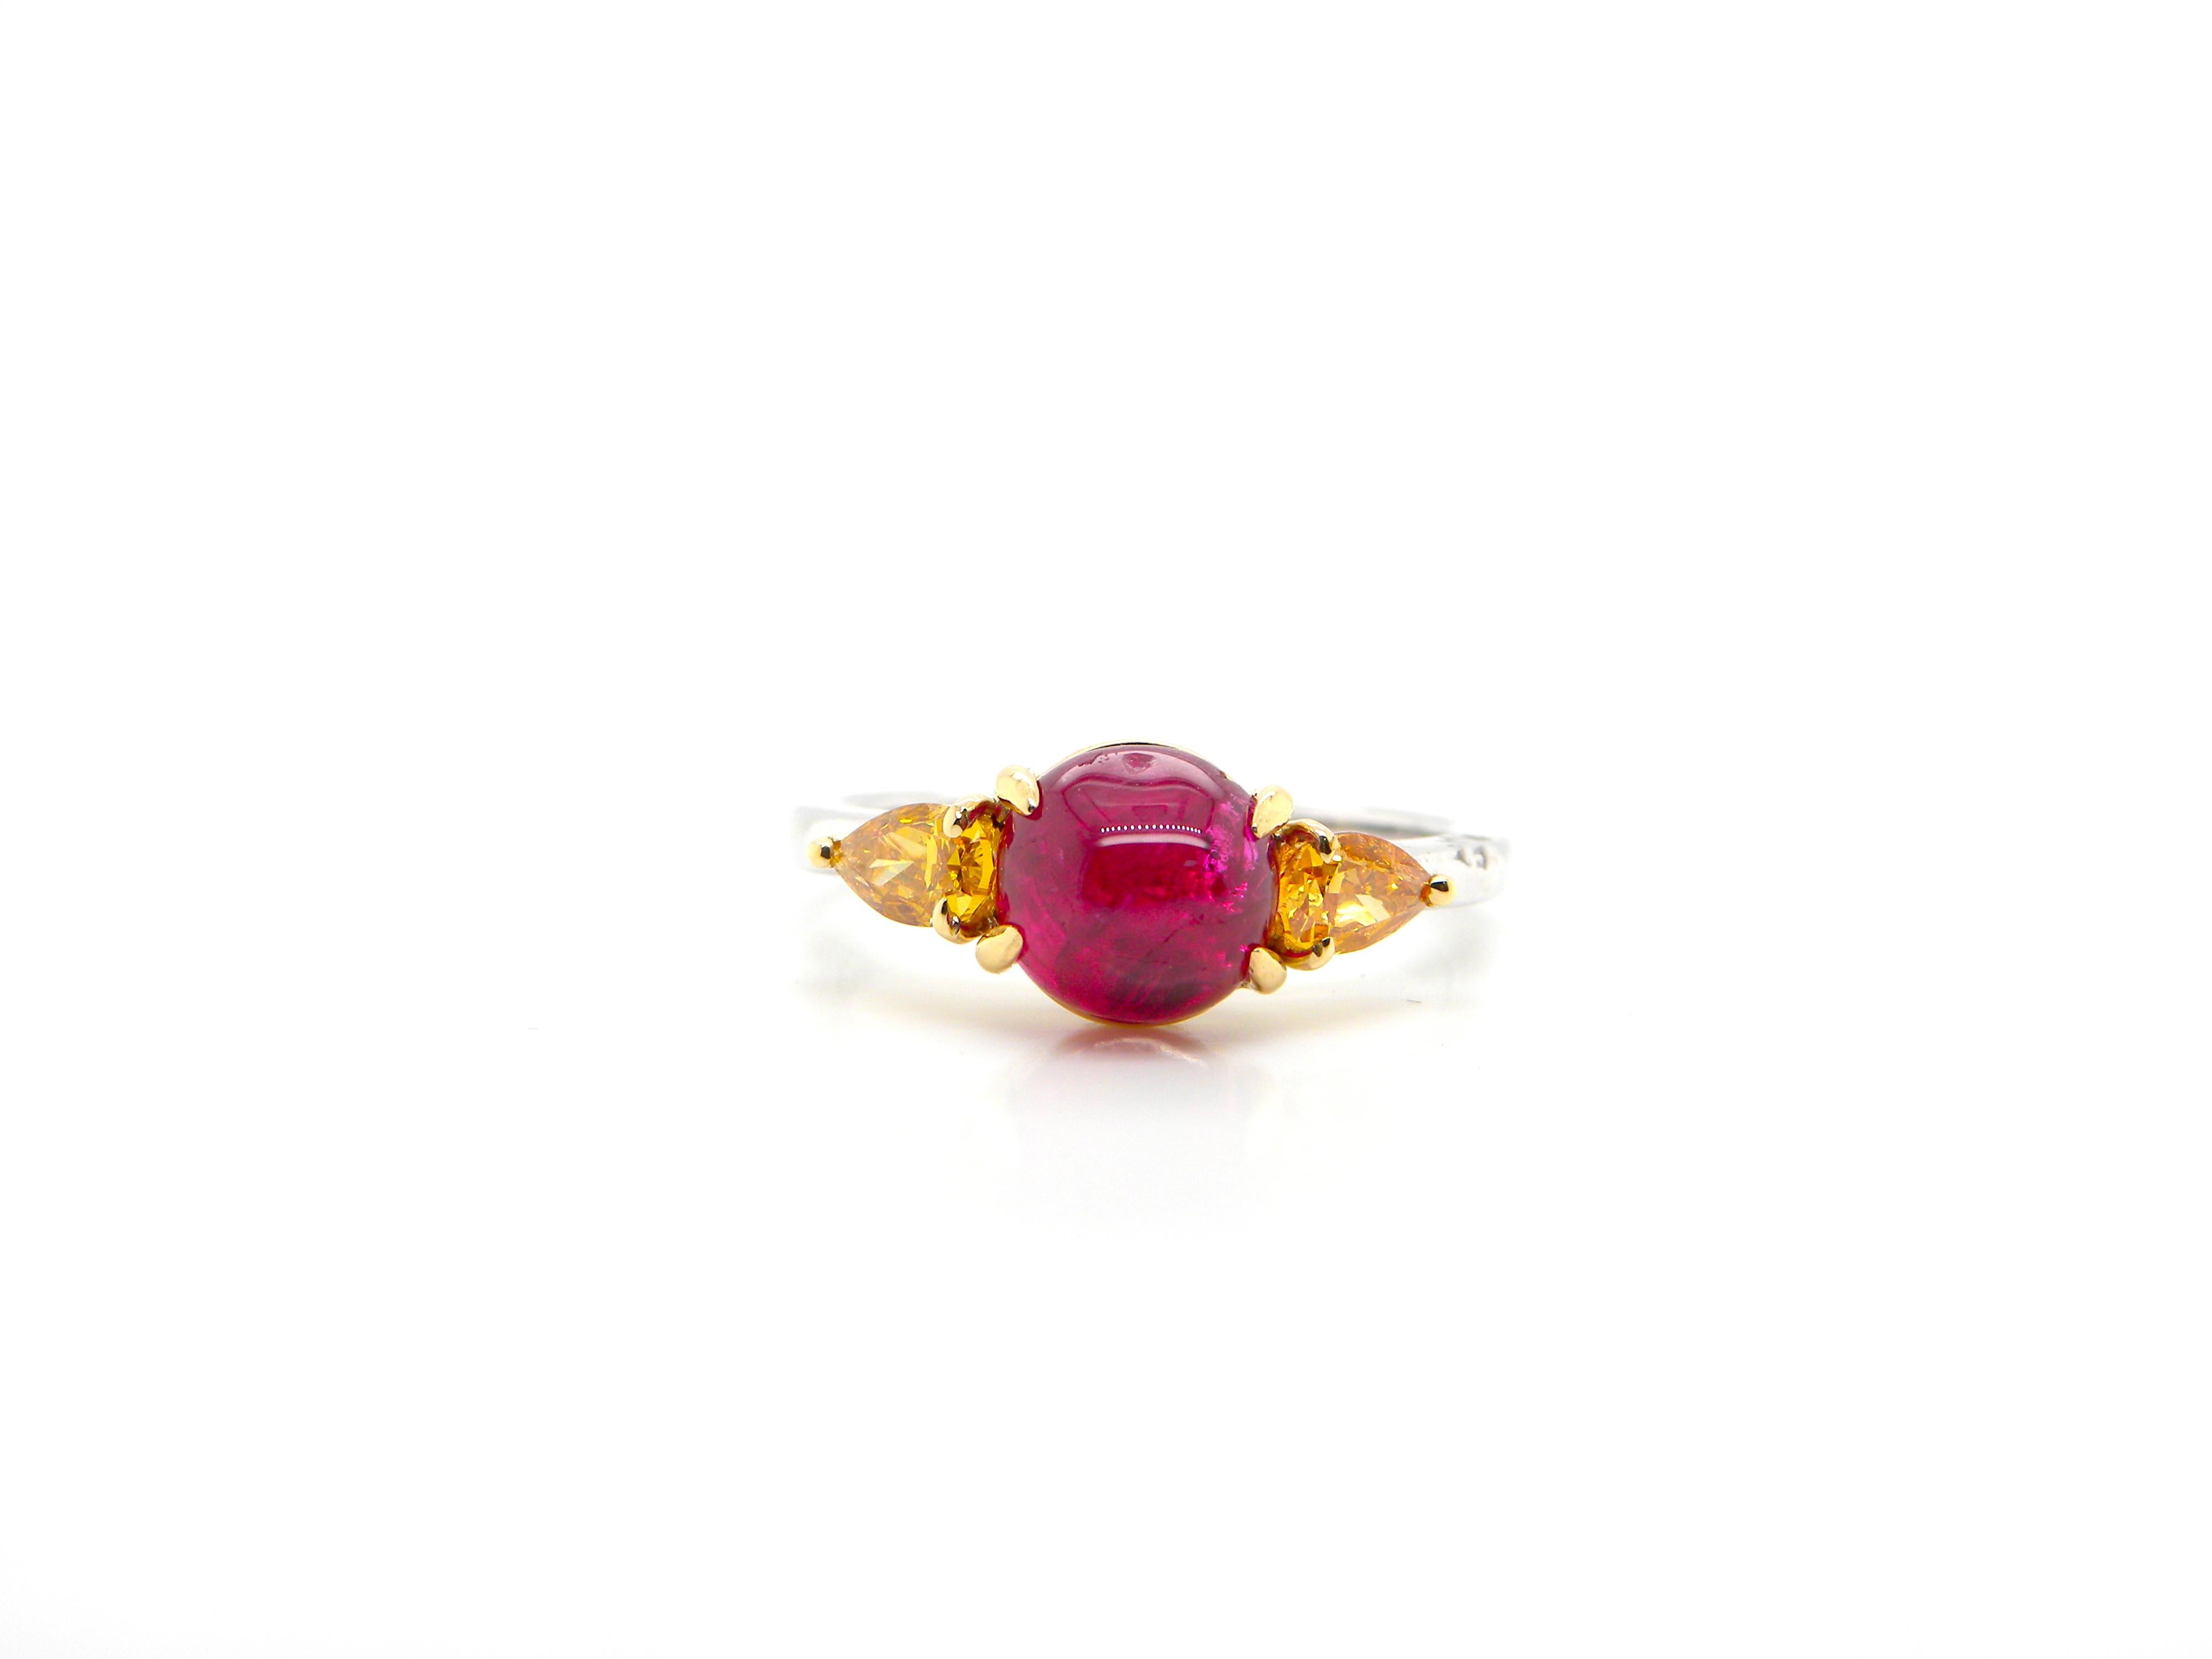 2.64 Carat GRS Certified Unheated Burmese Vivid Red Ruby and Orange Diamond Ring:

A superb ring, it features a rare GRS certified 2.64 carat unheated Burmese vivid red ruby cabochon flanked by fancy intense yellow-orange pear-shaped diamonds